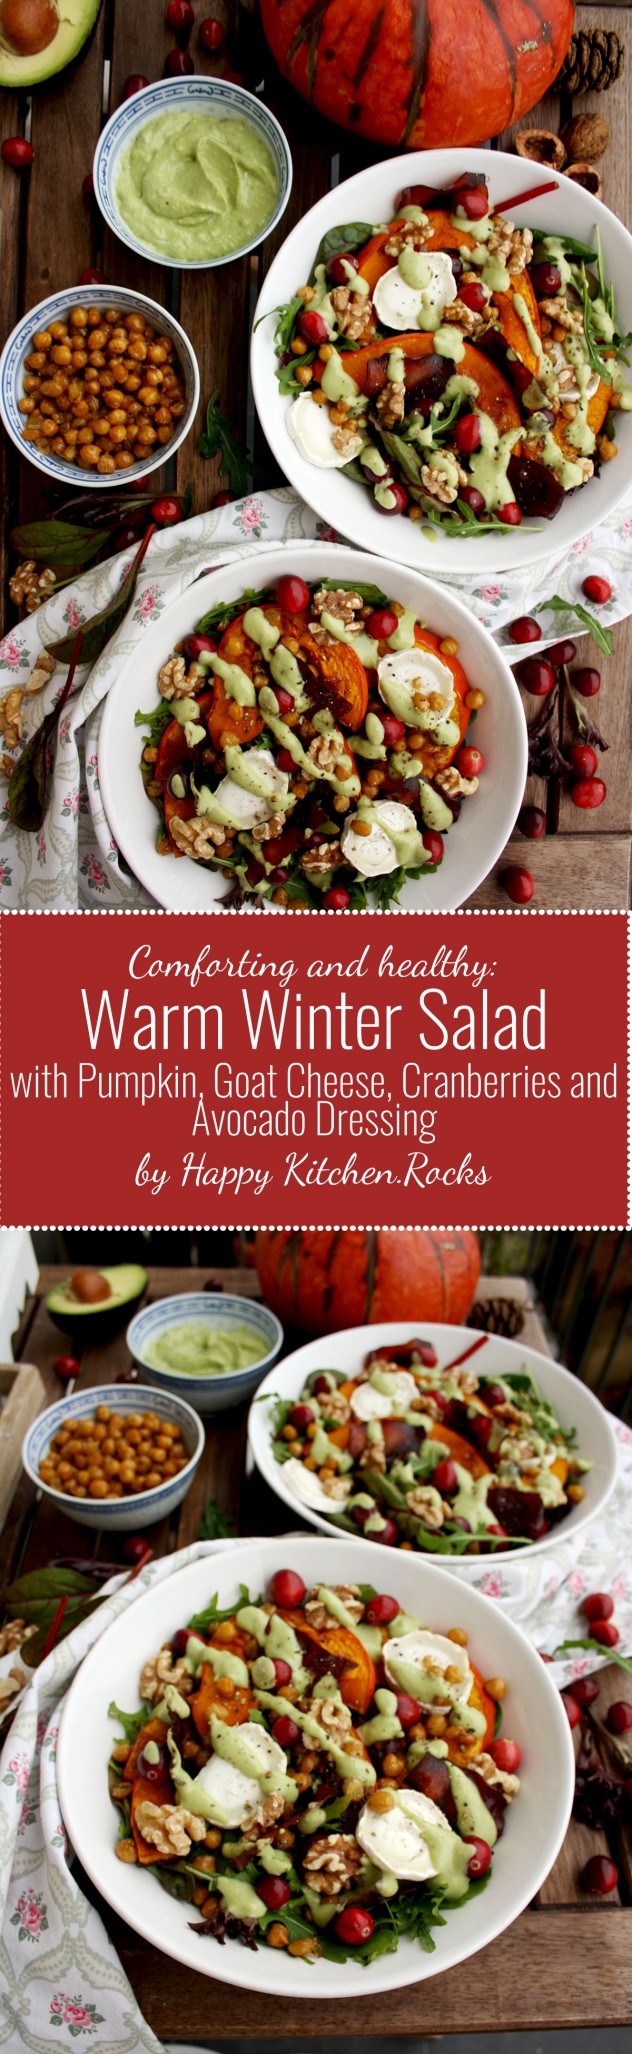 Winter Salad with Pumpkin, Goat Cheese and Avocado Dressing Pinterest